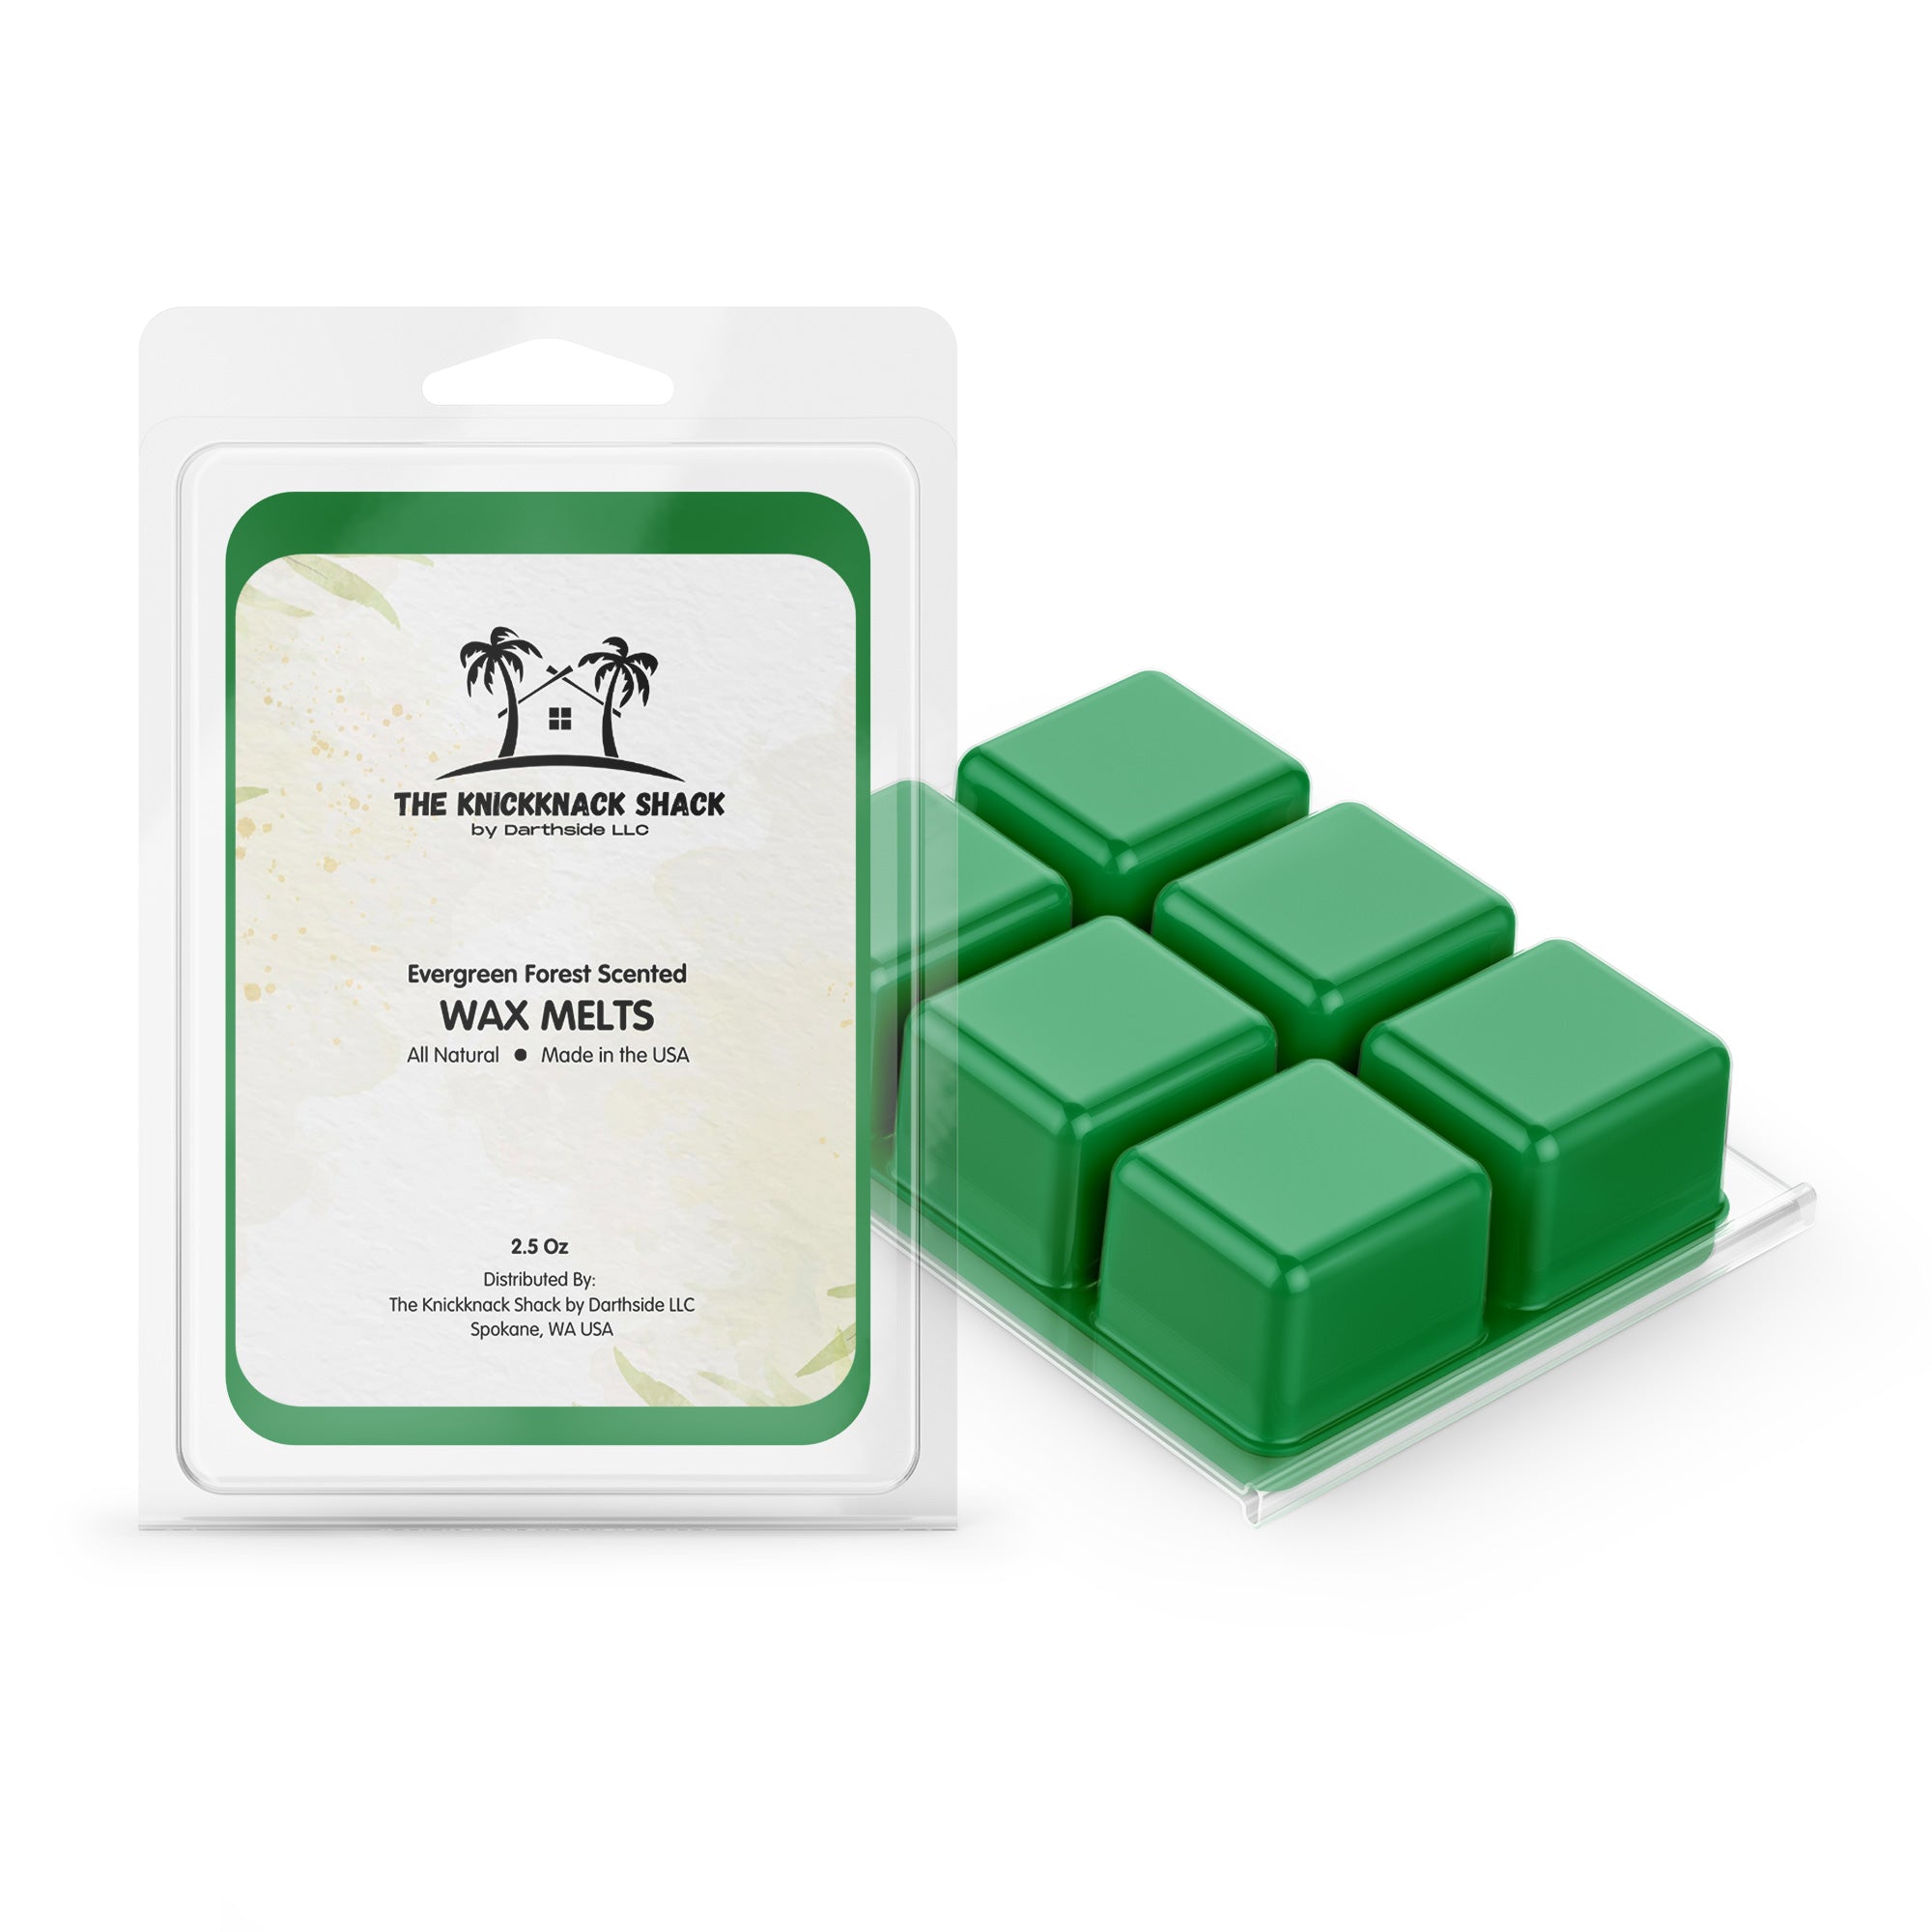 Evergreen Forest Scented Wax Melts